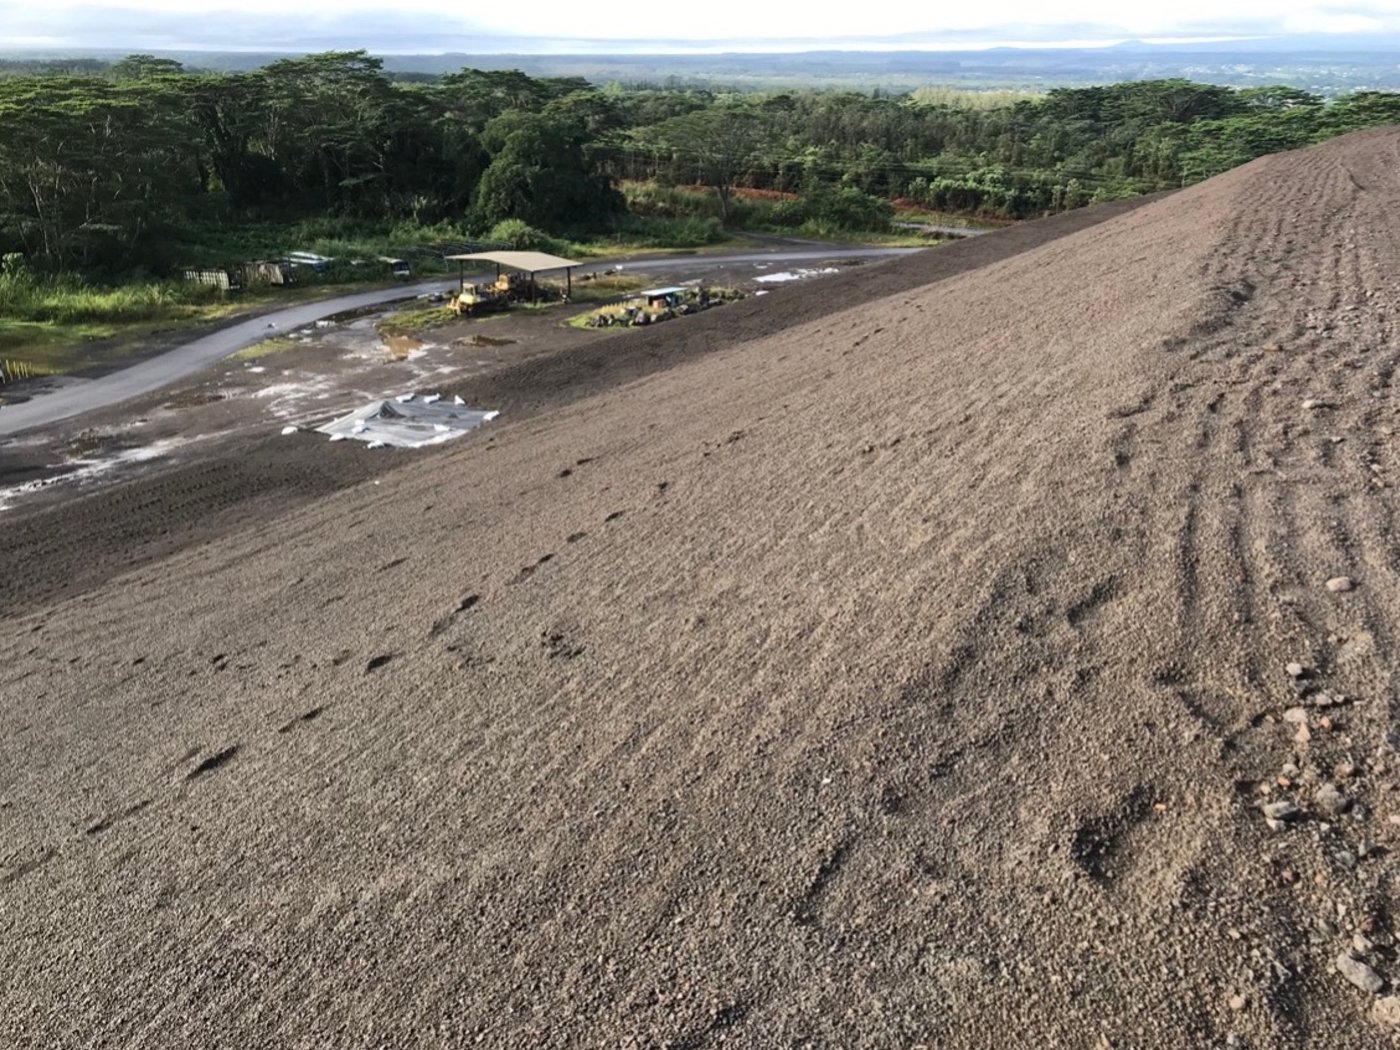 The natural sediment of the surrounding area was a sharp, angular, volcanic sand which made the growing of natural vegetation on the closure very difficult.